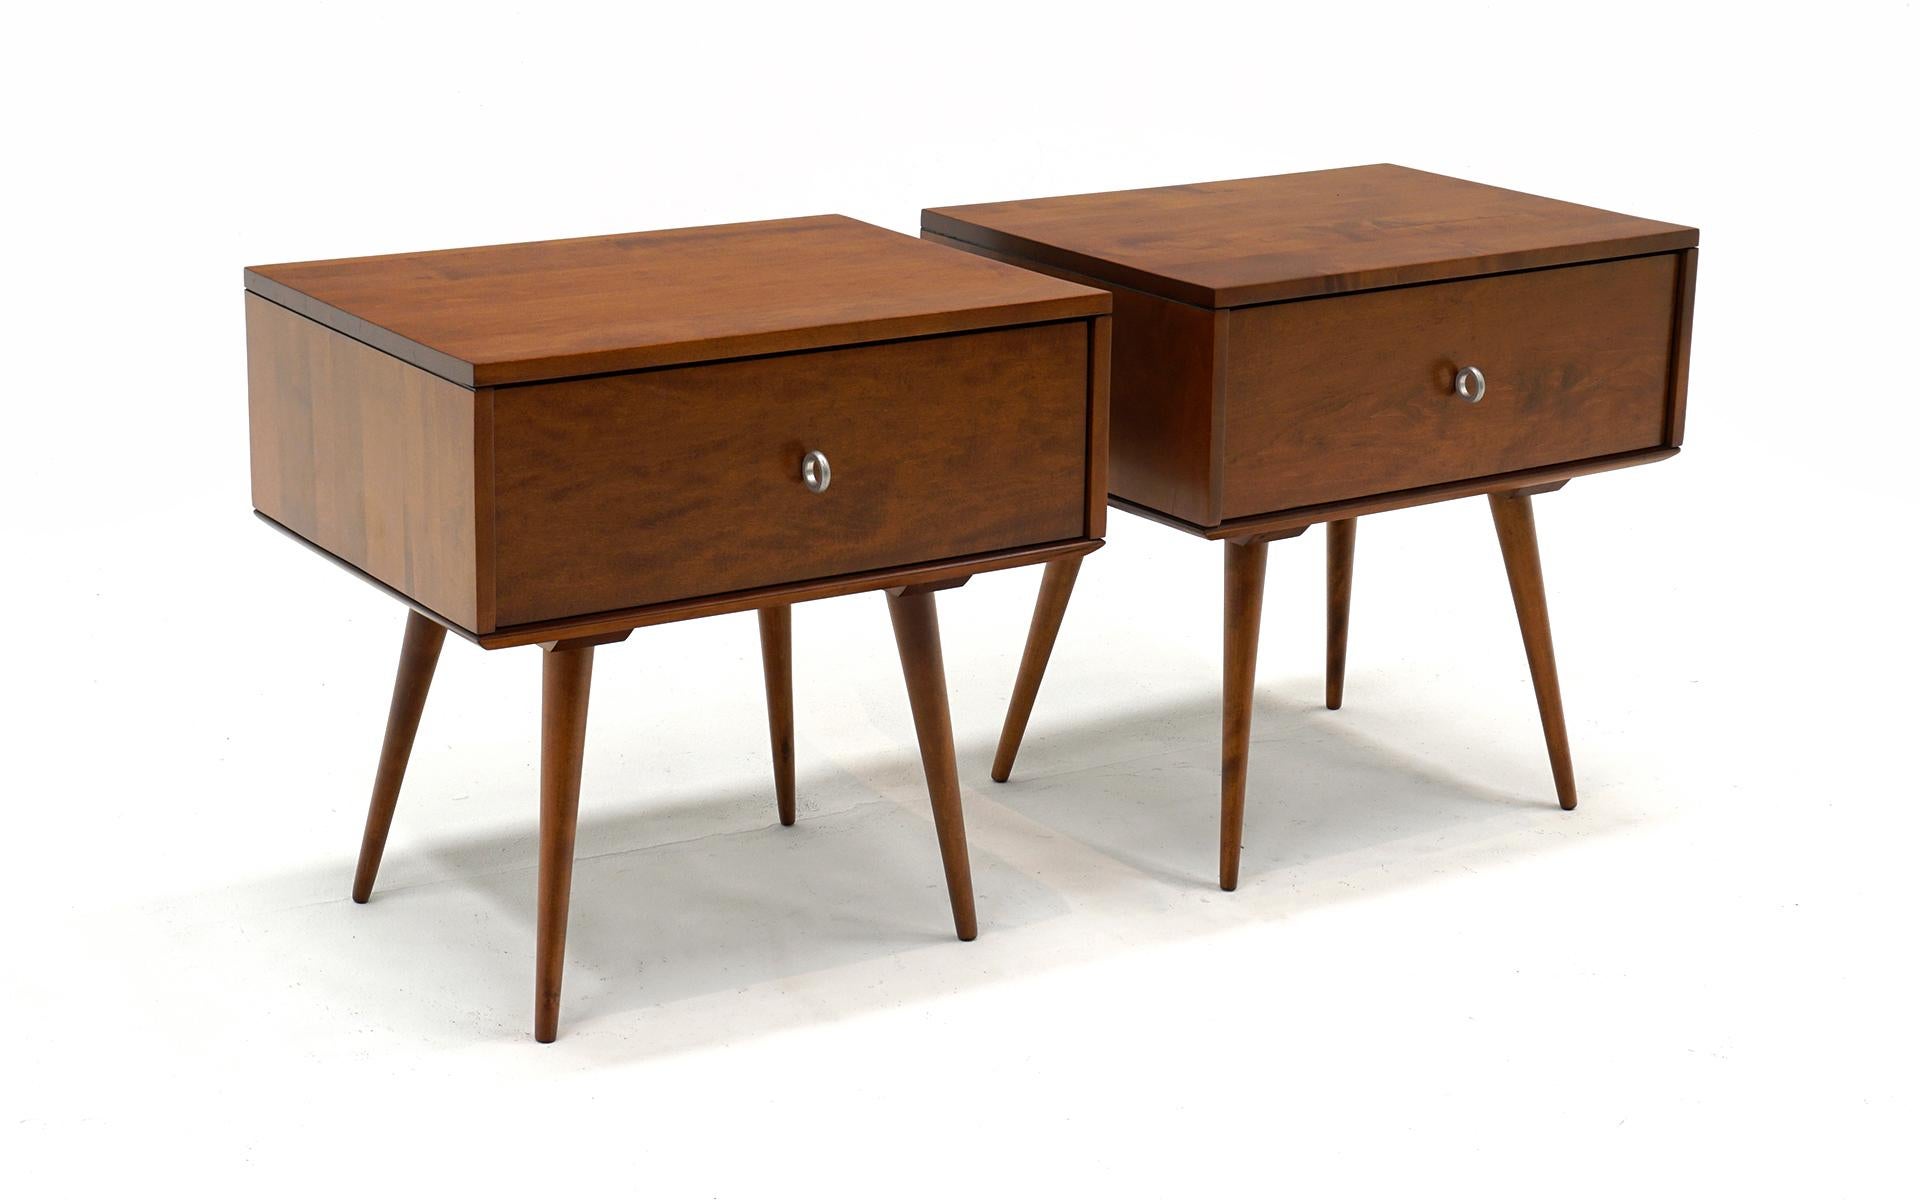 American Pair of Paul McCobb Night stands. Planner Group for Winchendon. 1950's. Signed.